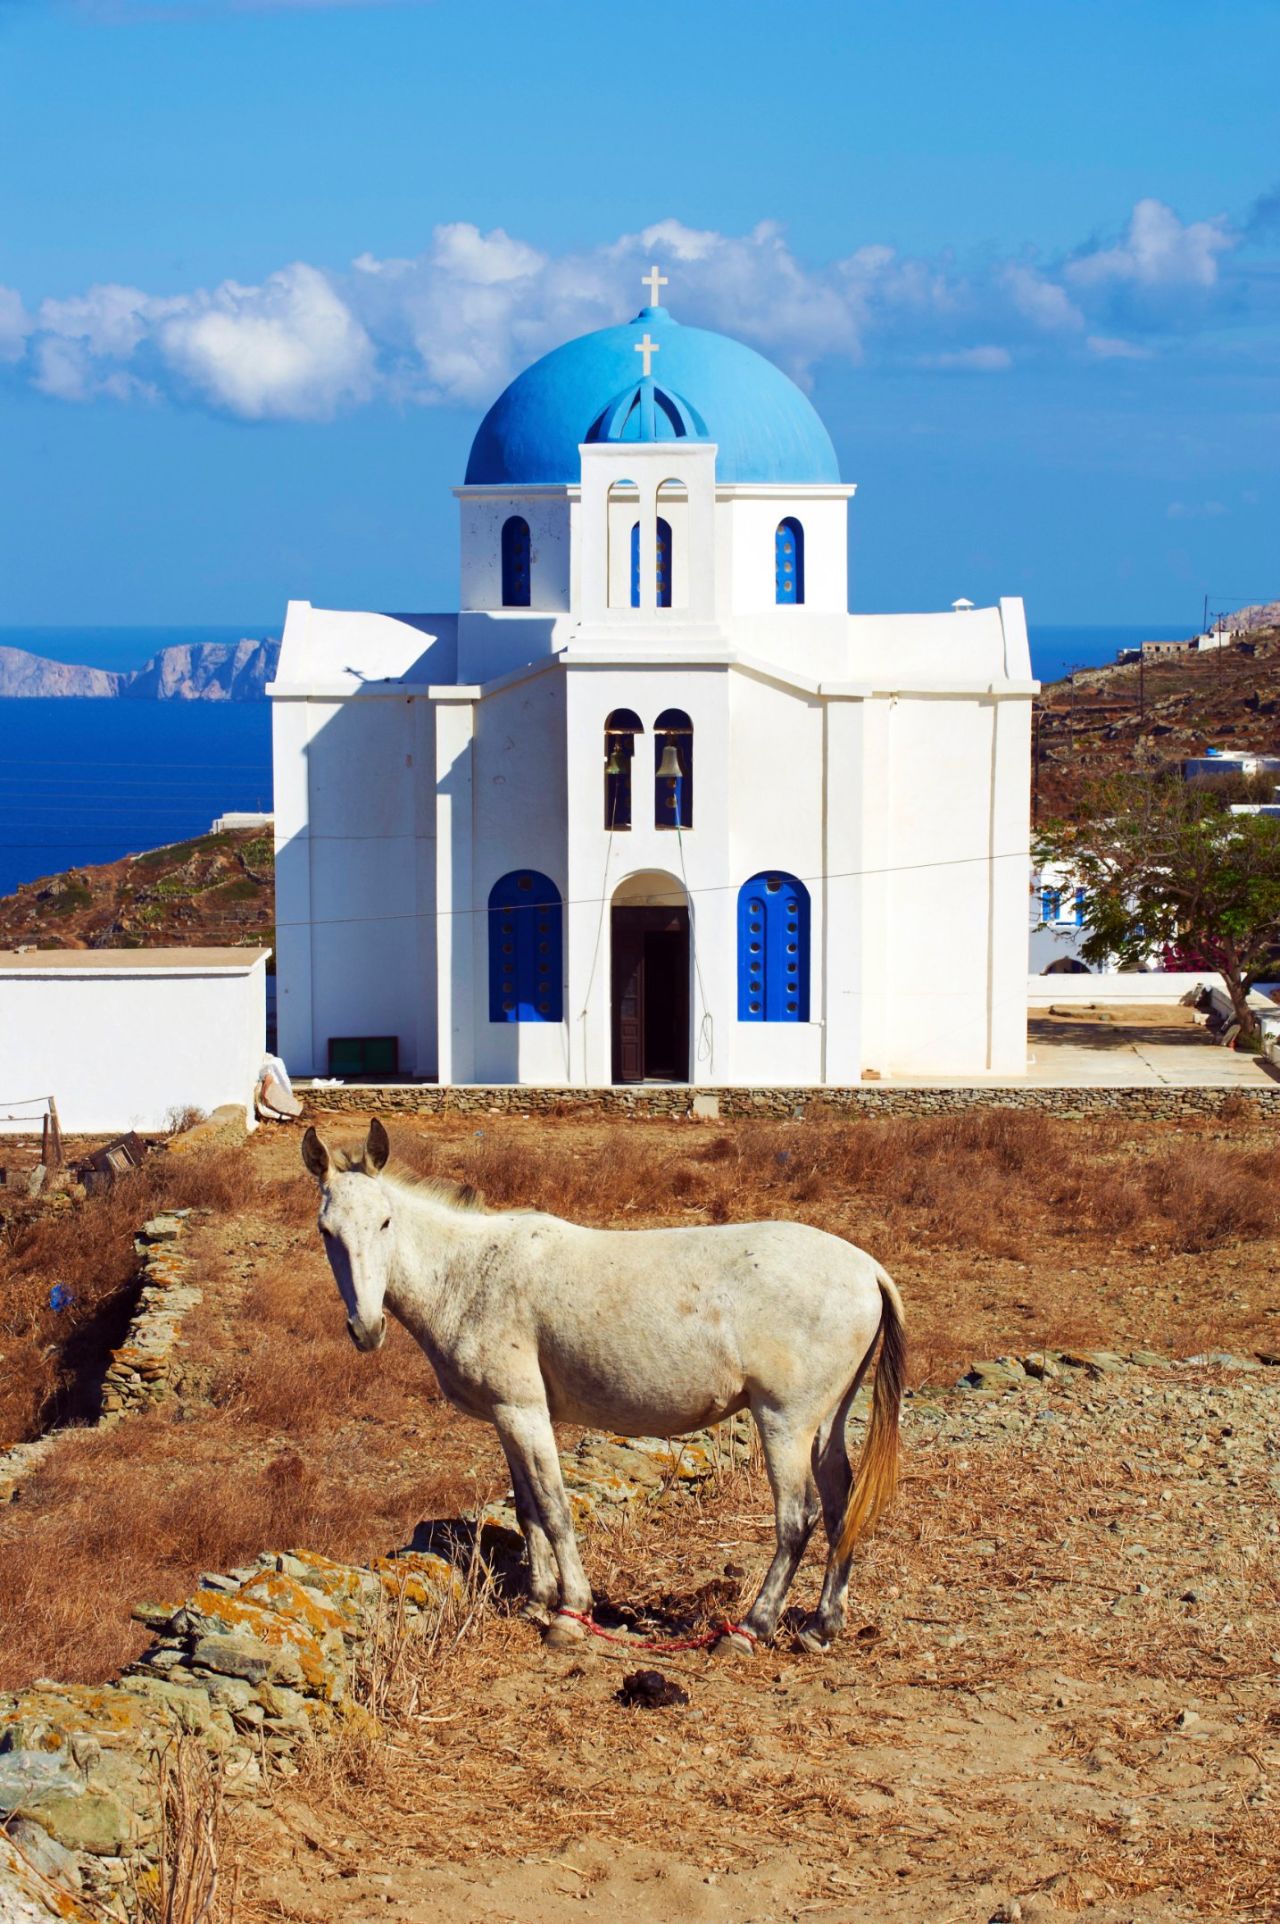 Folegandros in the Cyclades has the whitewashed beauty of Santorini but not the crowds.